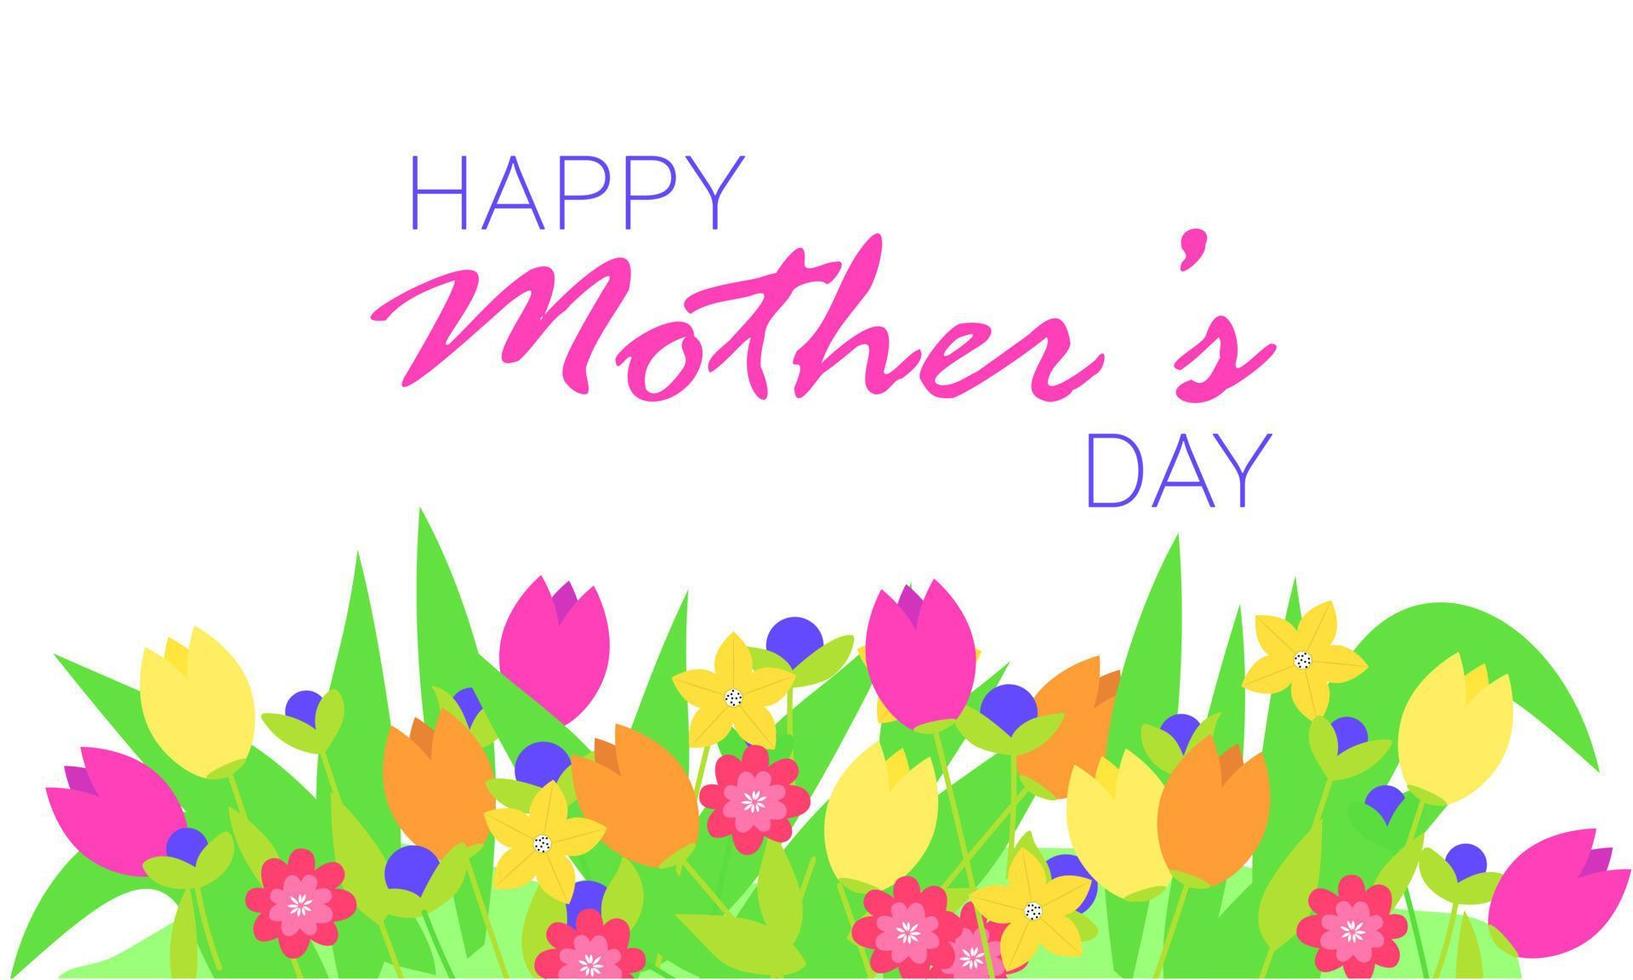 Flowers banner for happy Mother's Day. vector